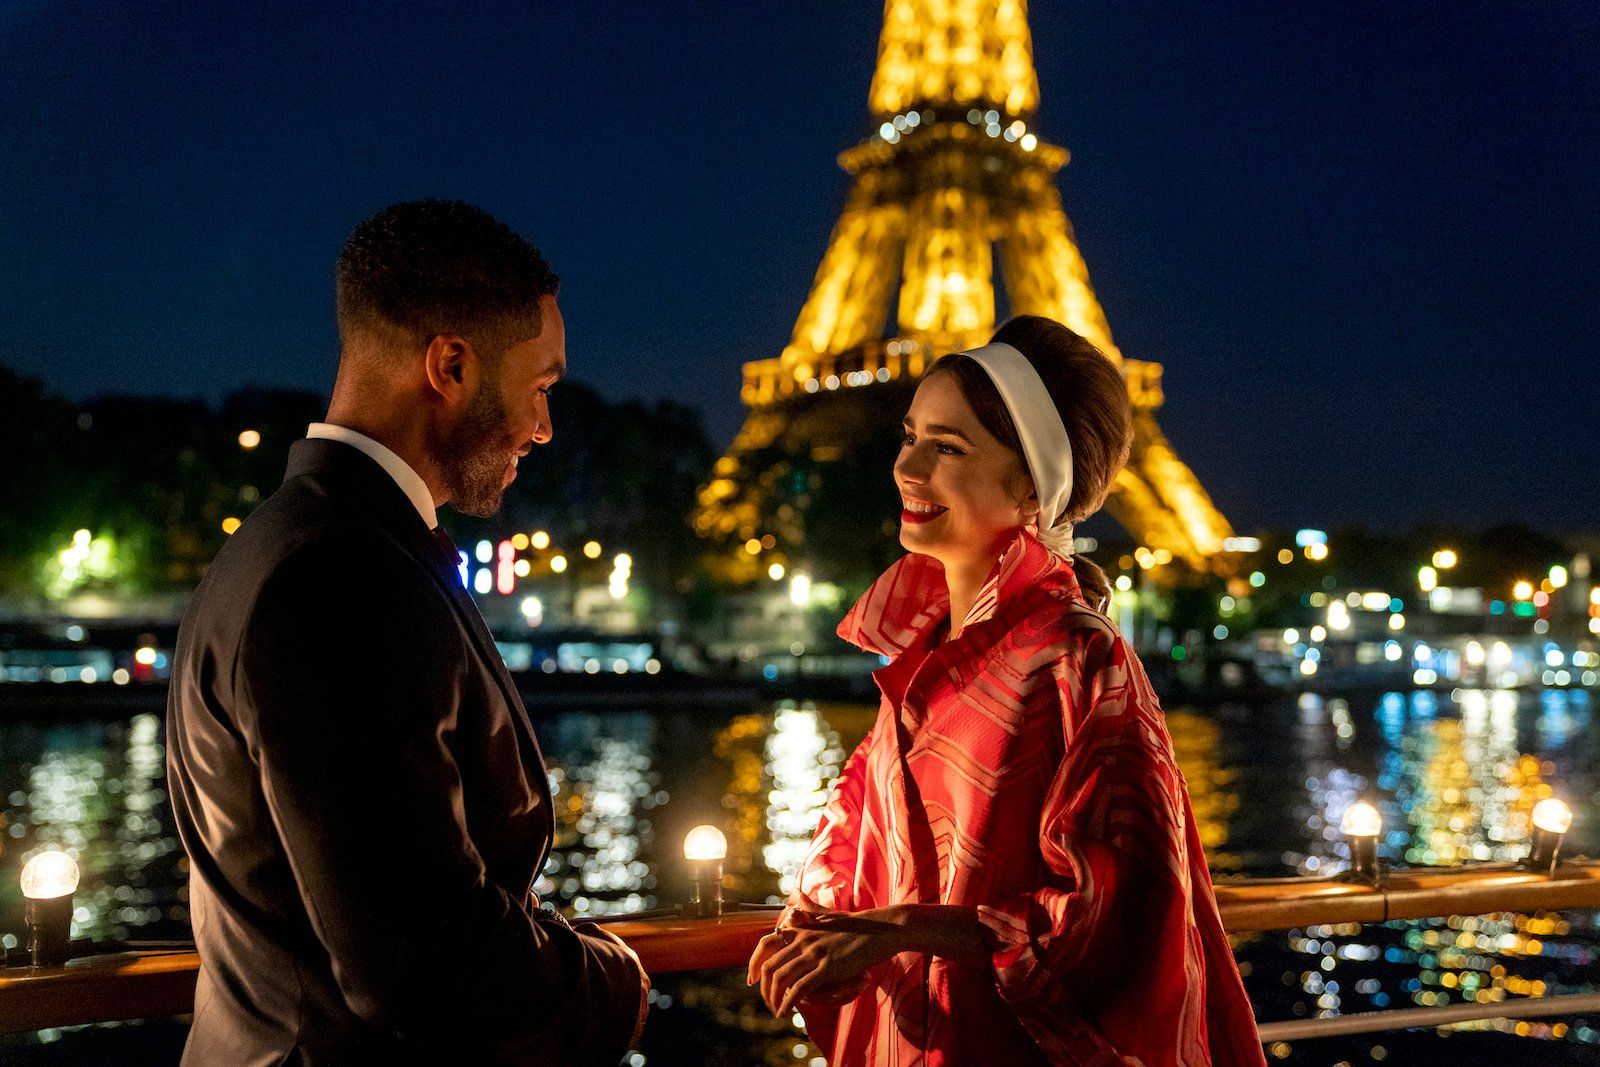 Emily In Paris Season 2 First Look Images Tease Romance & Fashion